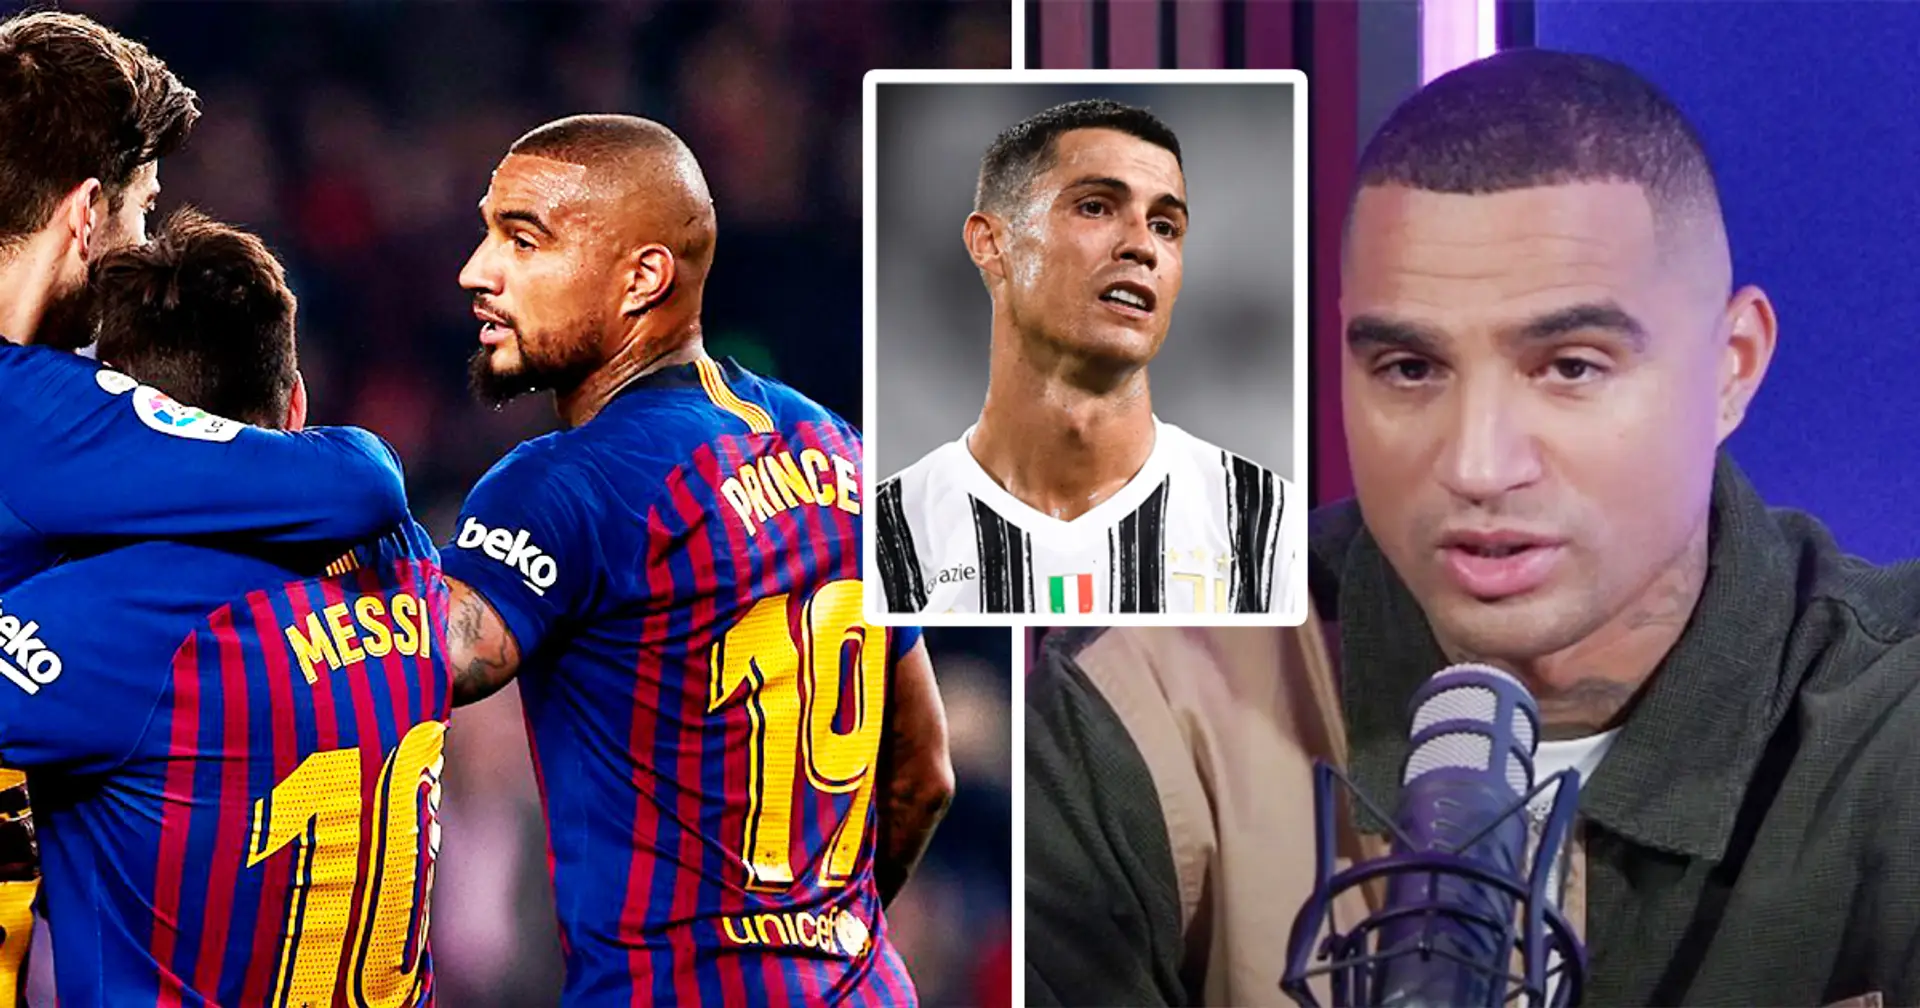 Is it difficult to score in Italy? Messi asked me because Ronaldo was there at that time - Kevin-Prince Boateng